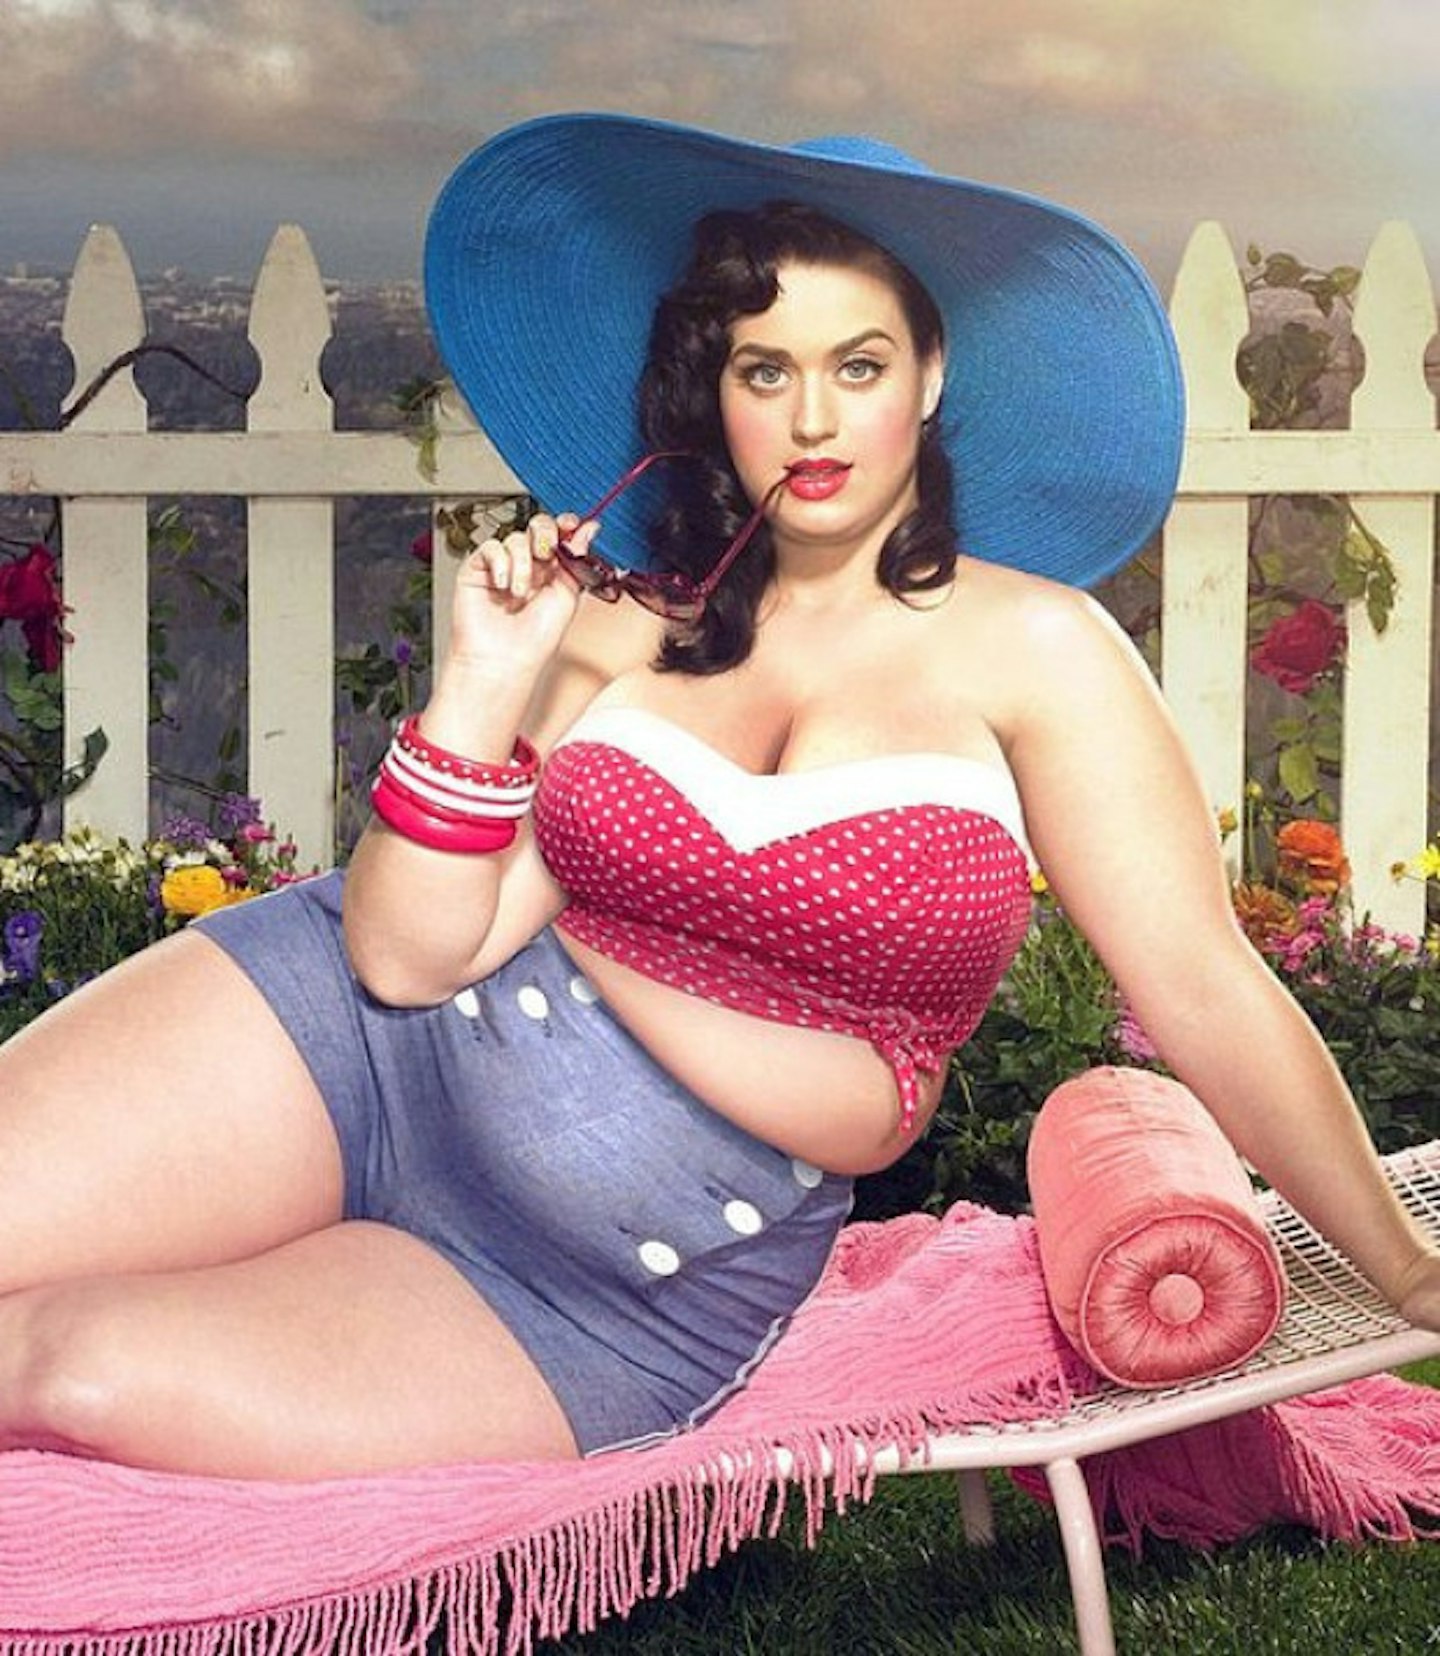 katy_perry_plump___wallpaper_by_xmasterdavid-d7bdtrw-these-celebrities-have-had-a-very-different-sort-of-photoshop-makeover-but-are-they-s-aab39889-e4cd-4c79-b31d-9c2439f26cb9